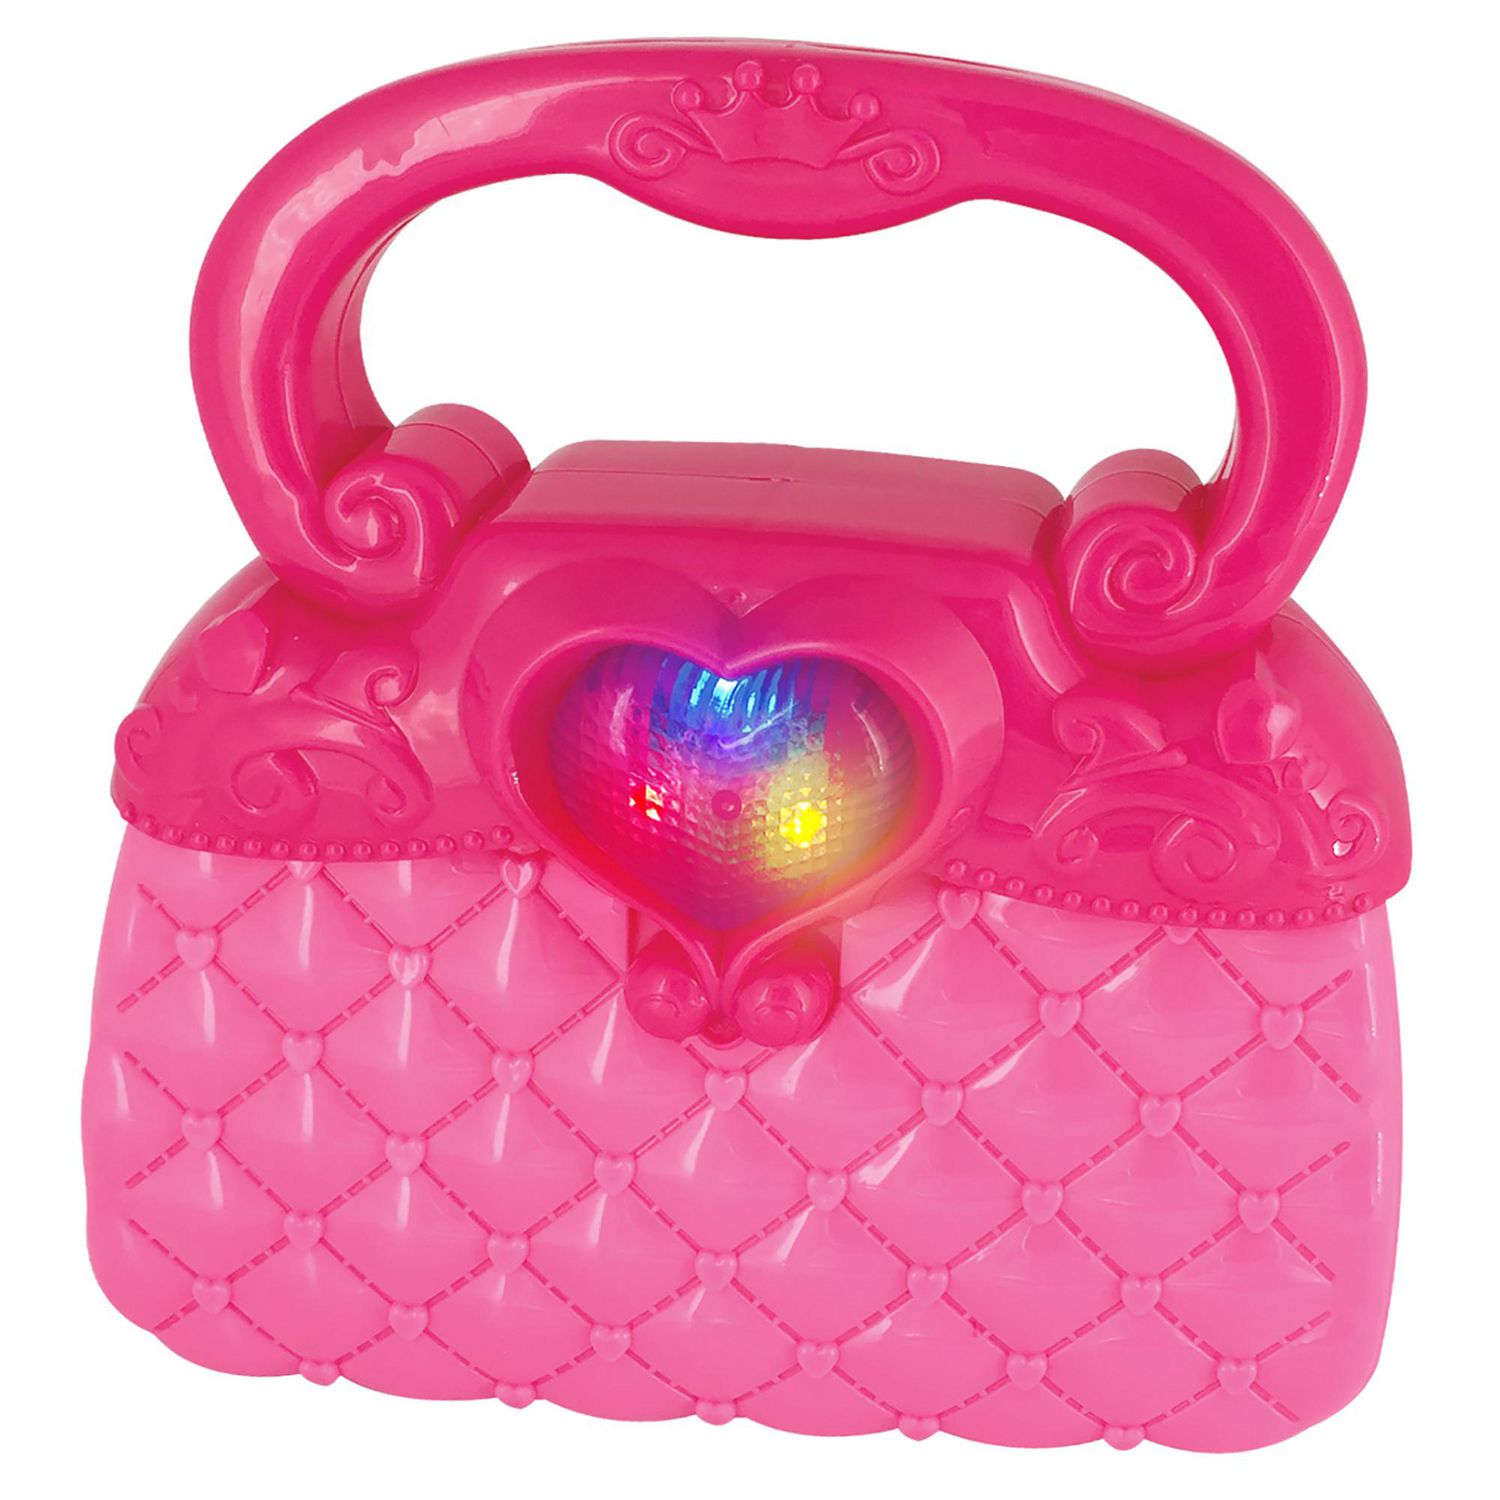 My First Purse - Toys & Co. - Epoch Everlasting Play